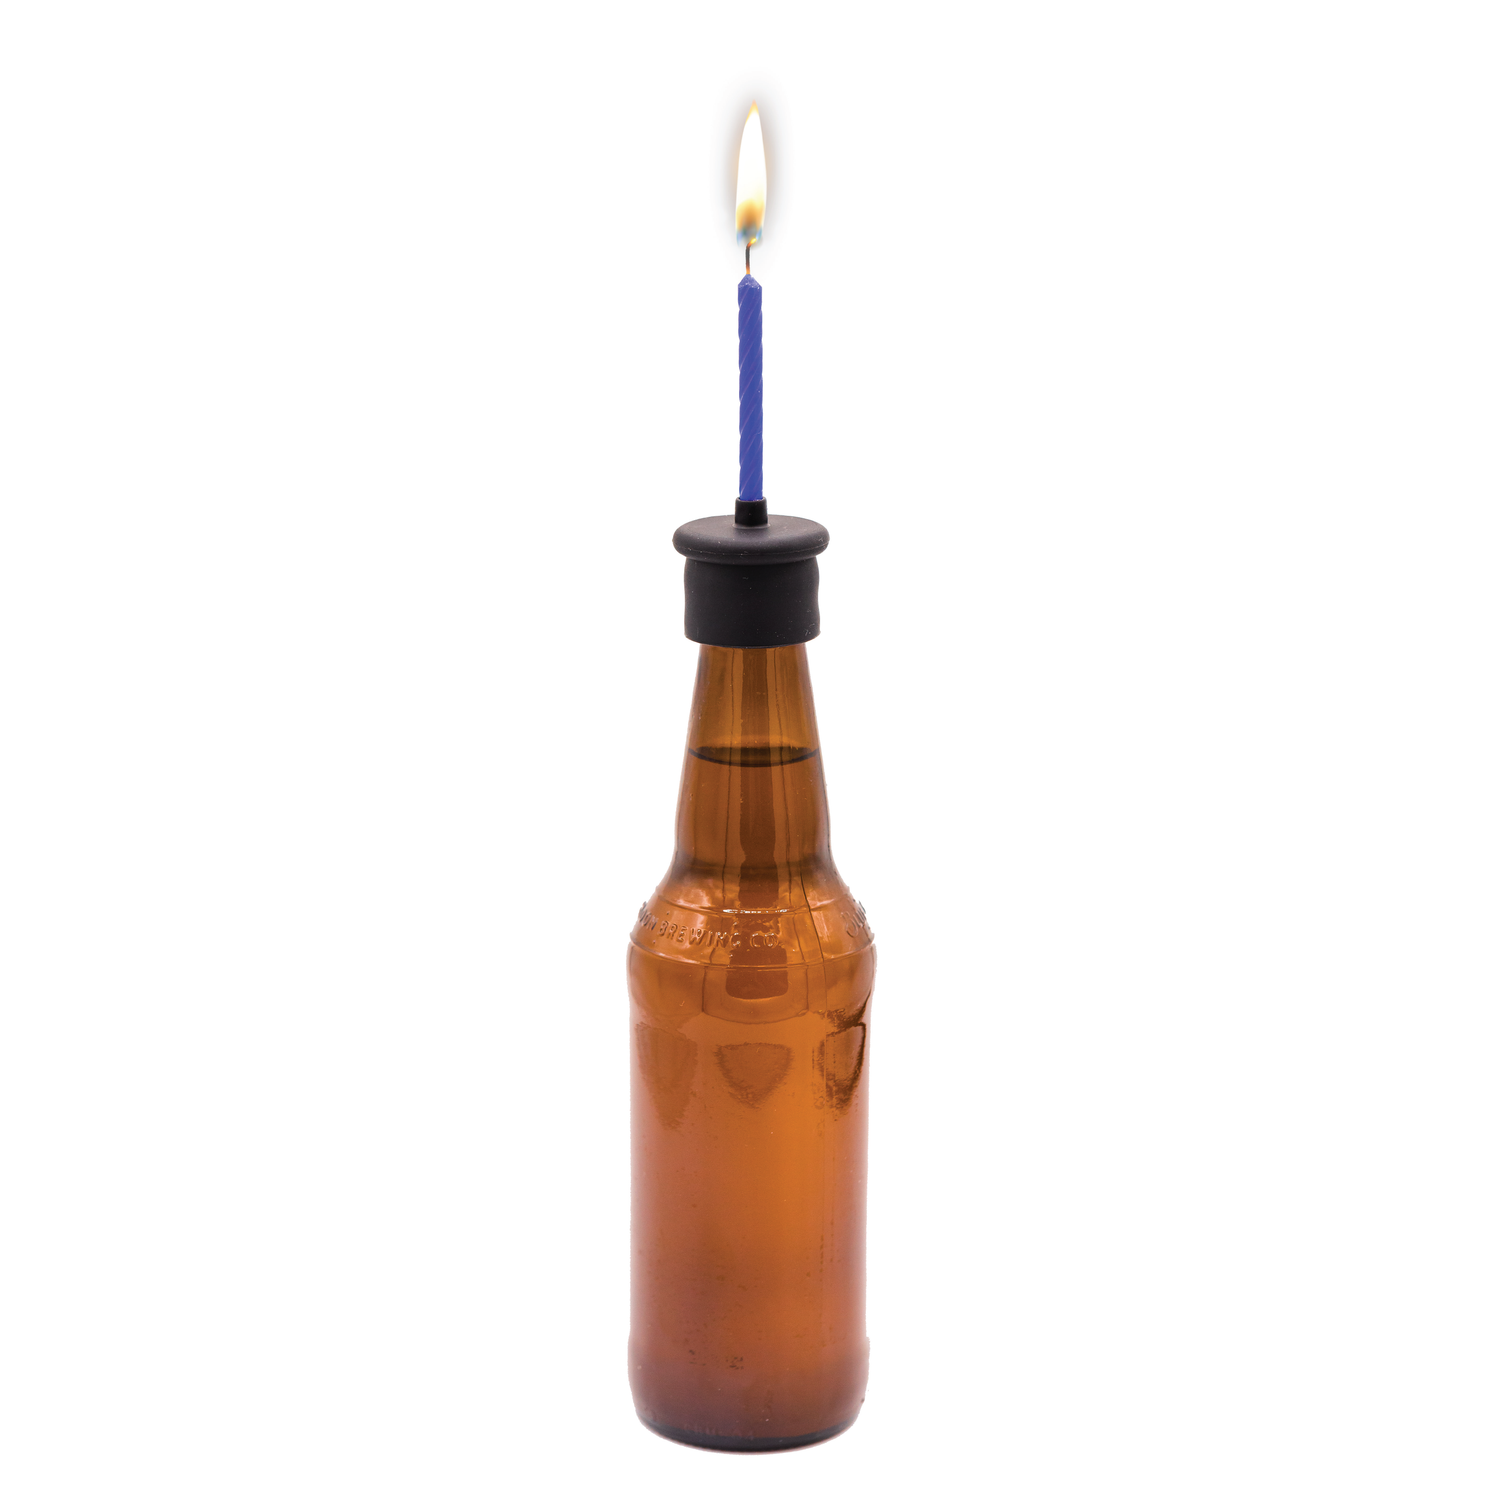 Bottle top candle holder on top of example bottle by Skumps